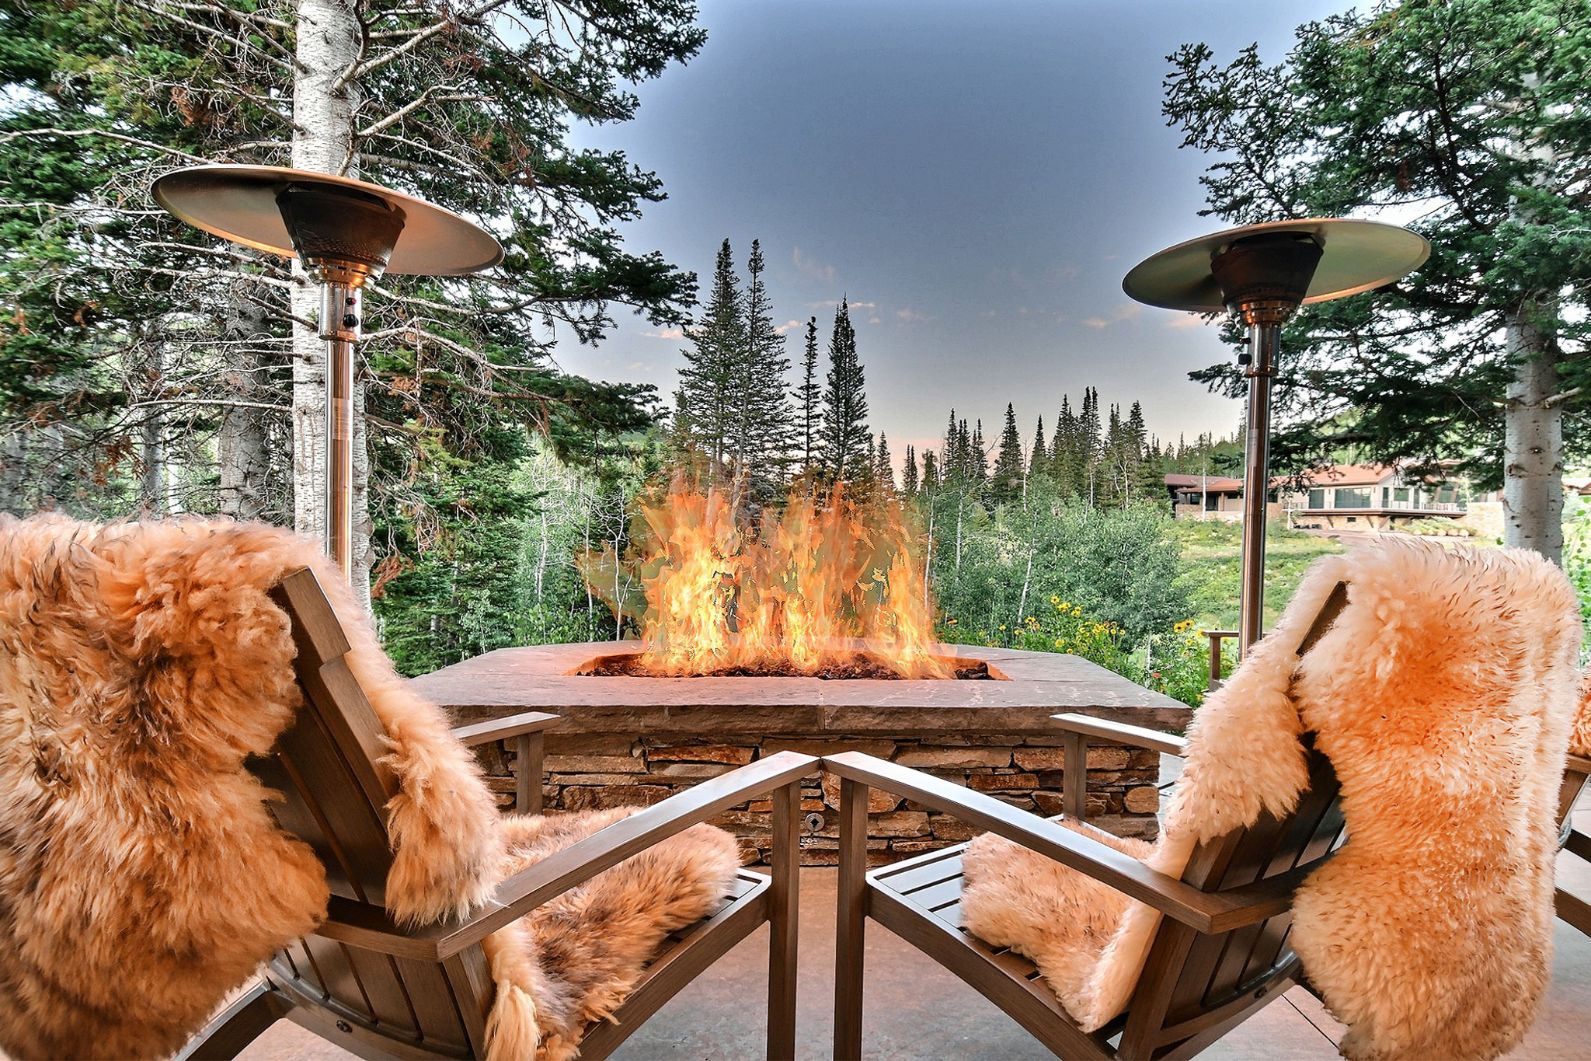 Relax around the Fire at Paradise - one of our Luxury Park City Vacation Rentals